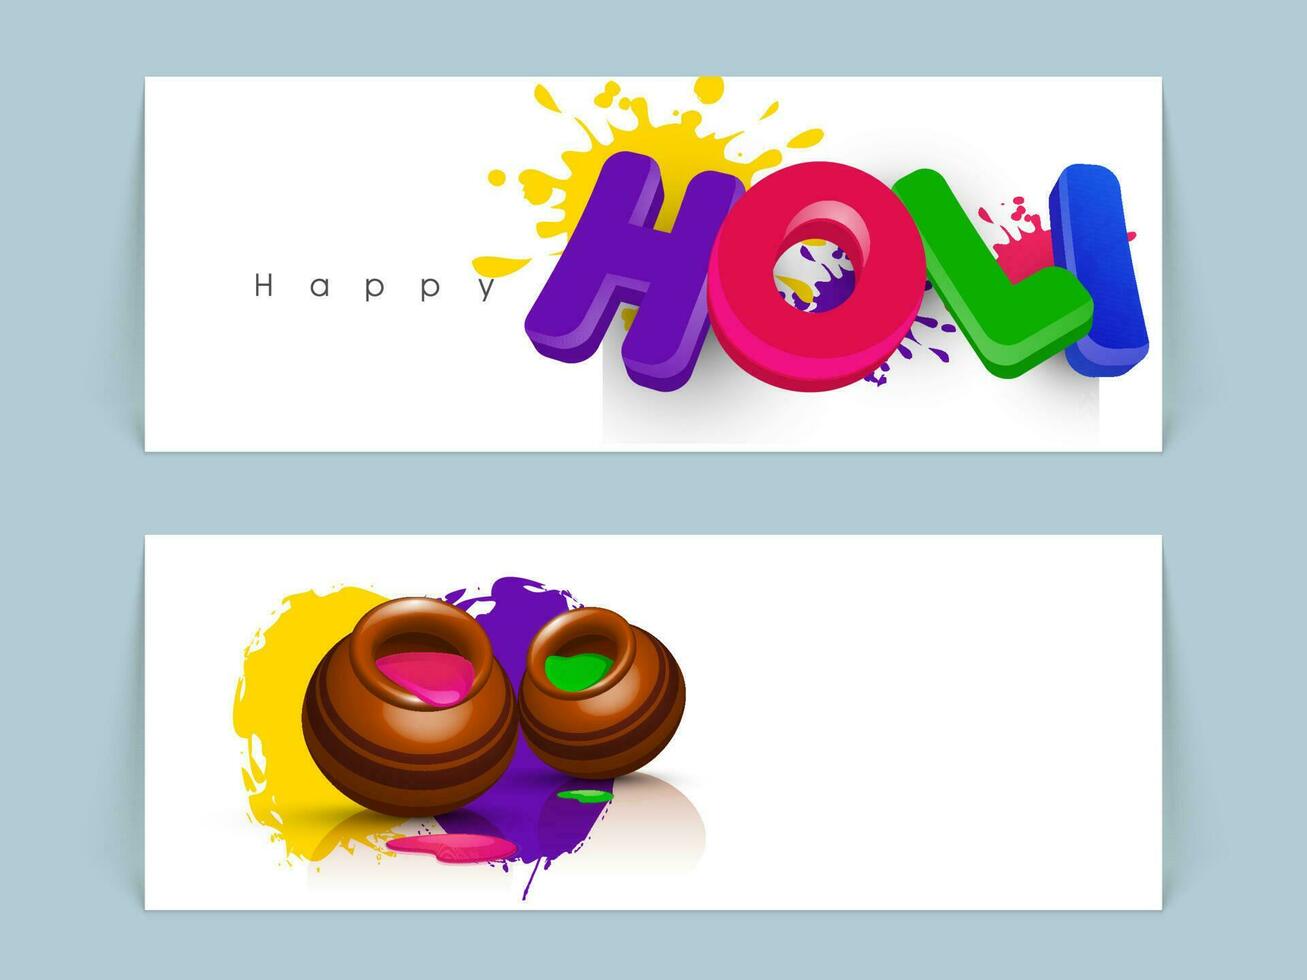 3D Colorful Holi Font With Mud Pot Full Of Liquid Colors And Splatter Effect On White Background. Set Of Indian Festival Of Colours Banner Or Header Design. vector